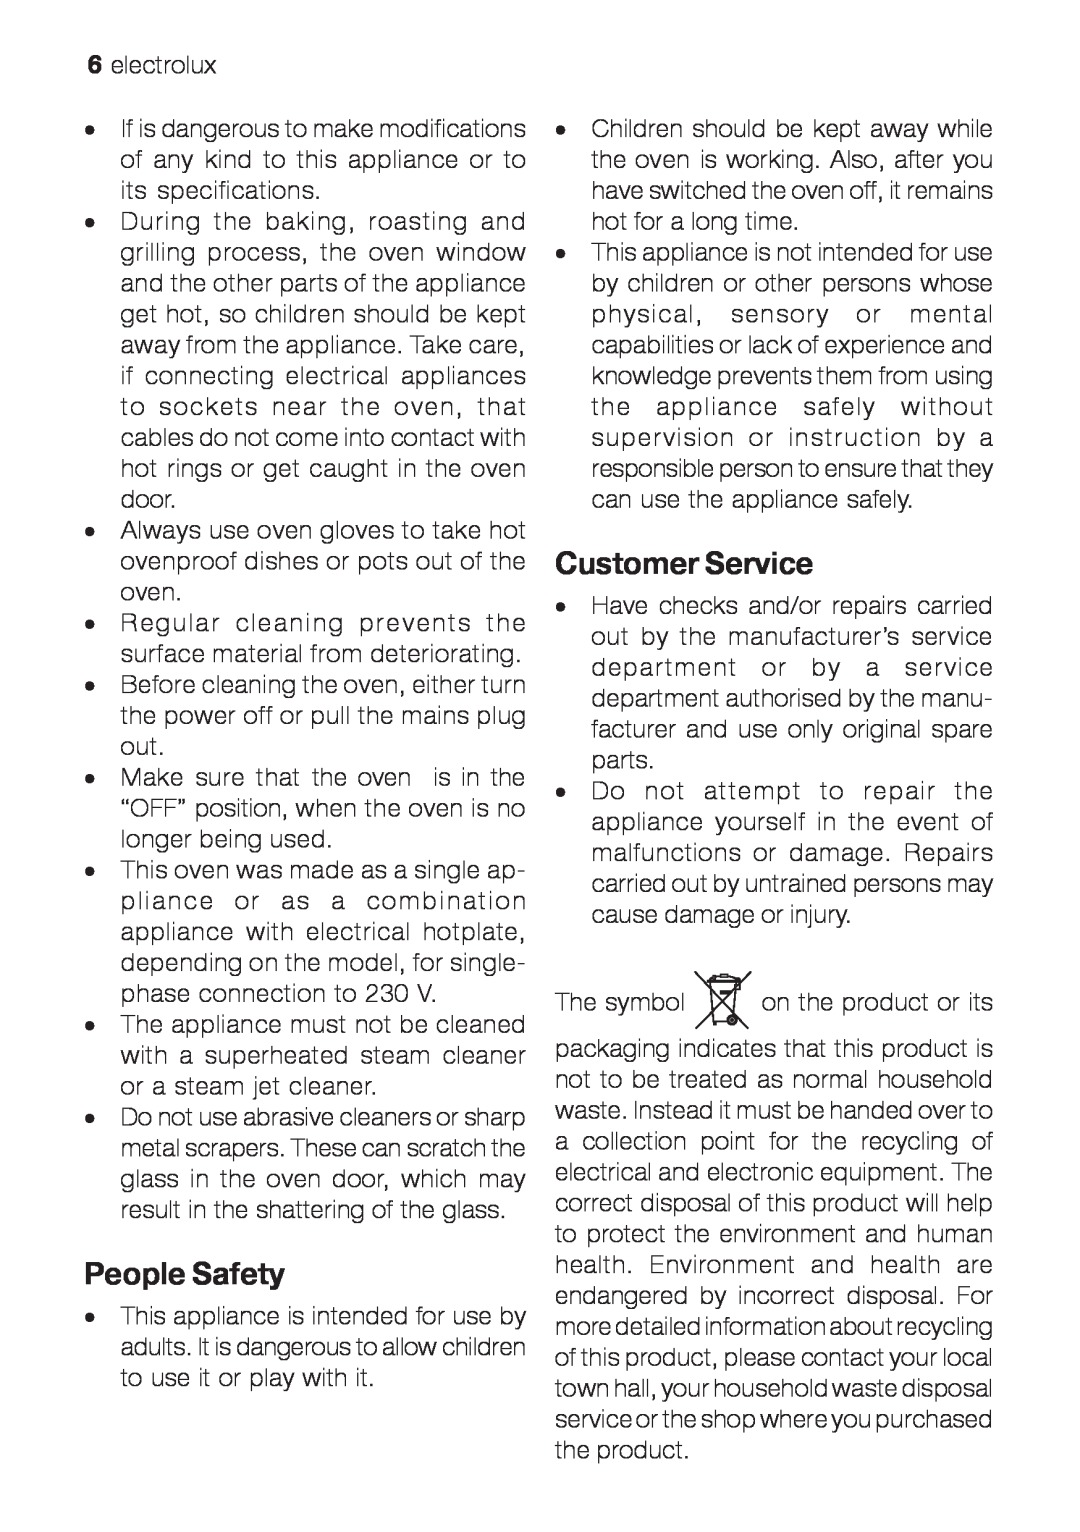 Electrolux EOG 10000 user manual People Safety, Customer Service 